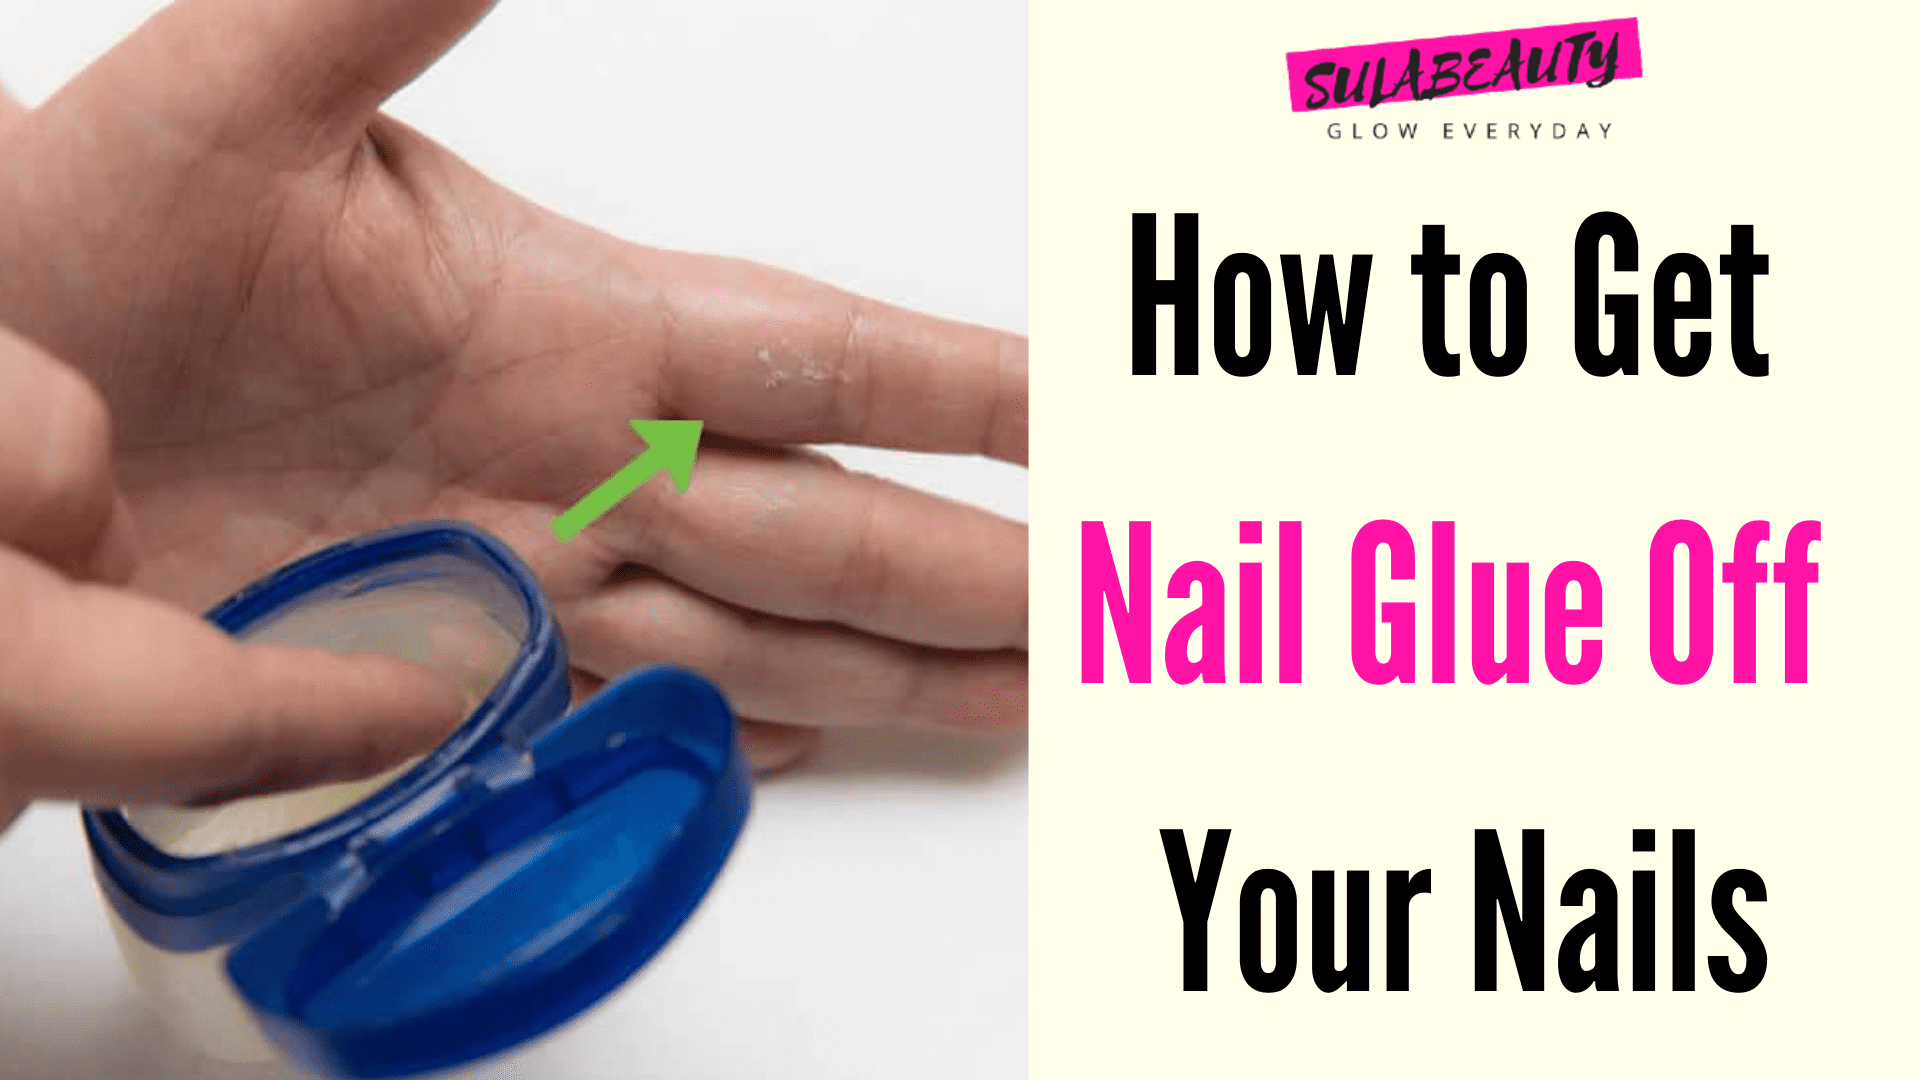 How to Get Nail Glue Off Your Nails - Sula Beauty